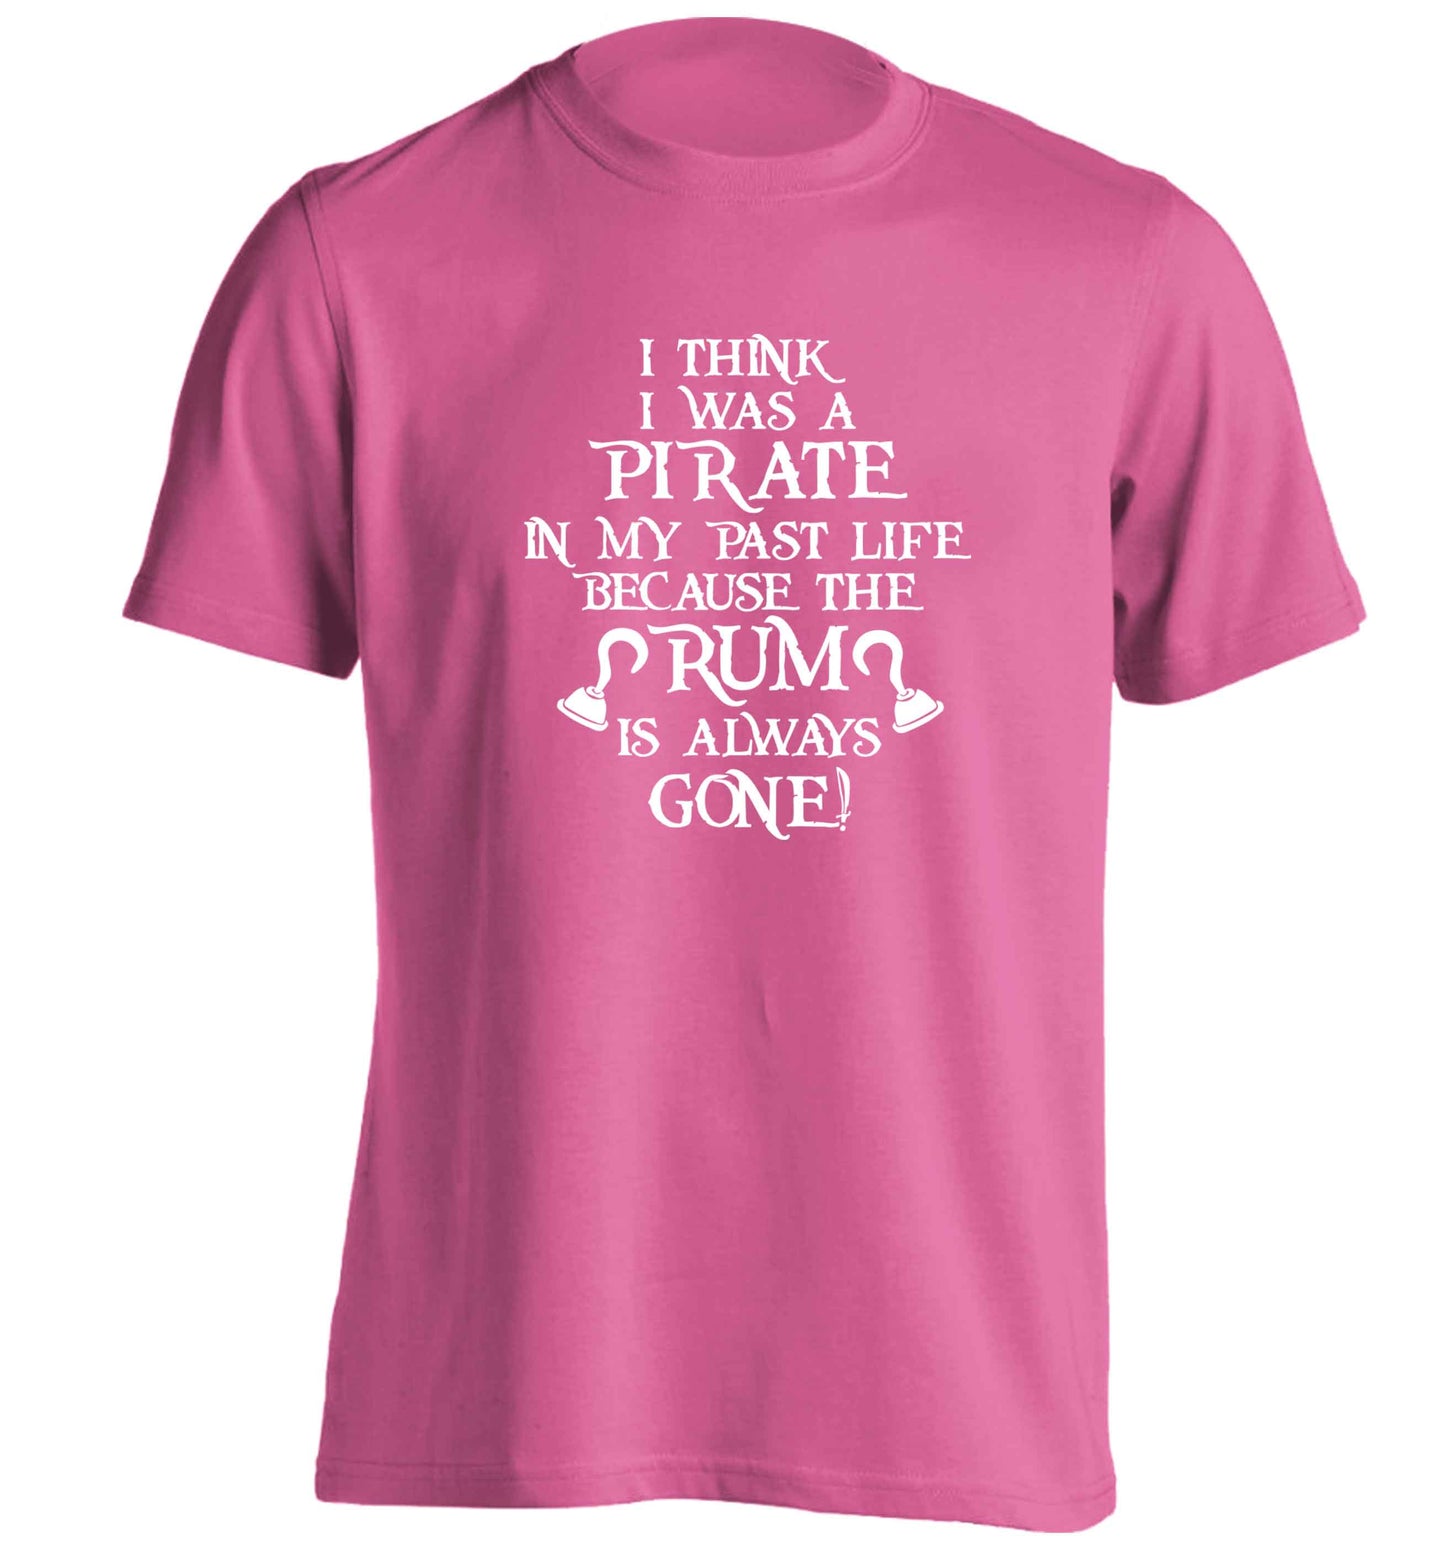 I think I was a pirate in my past life the rum is always gone adults unisex pink Tshirt 2XL